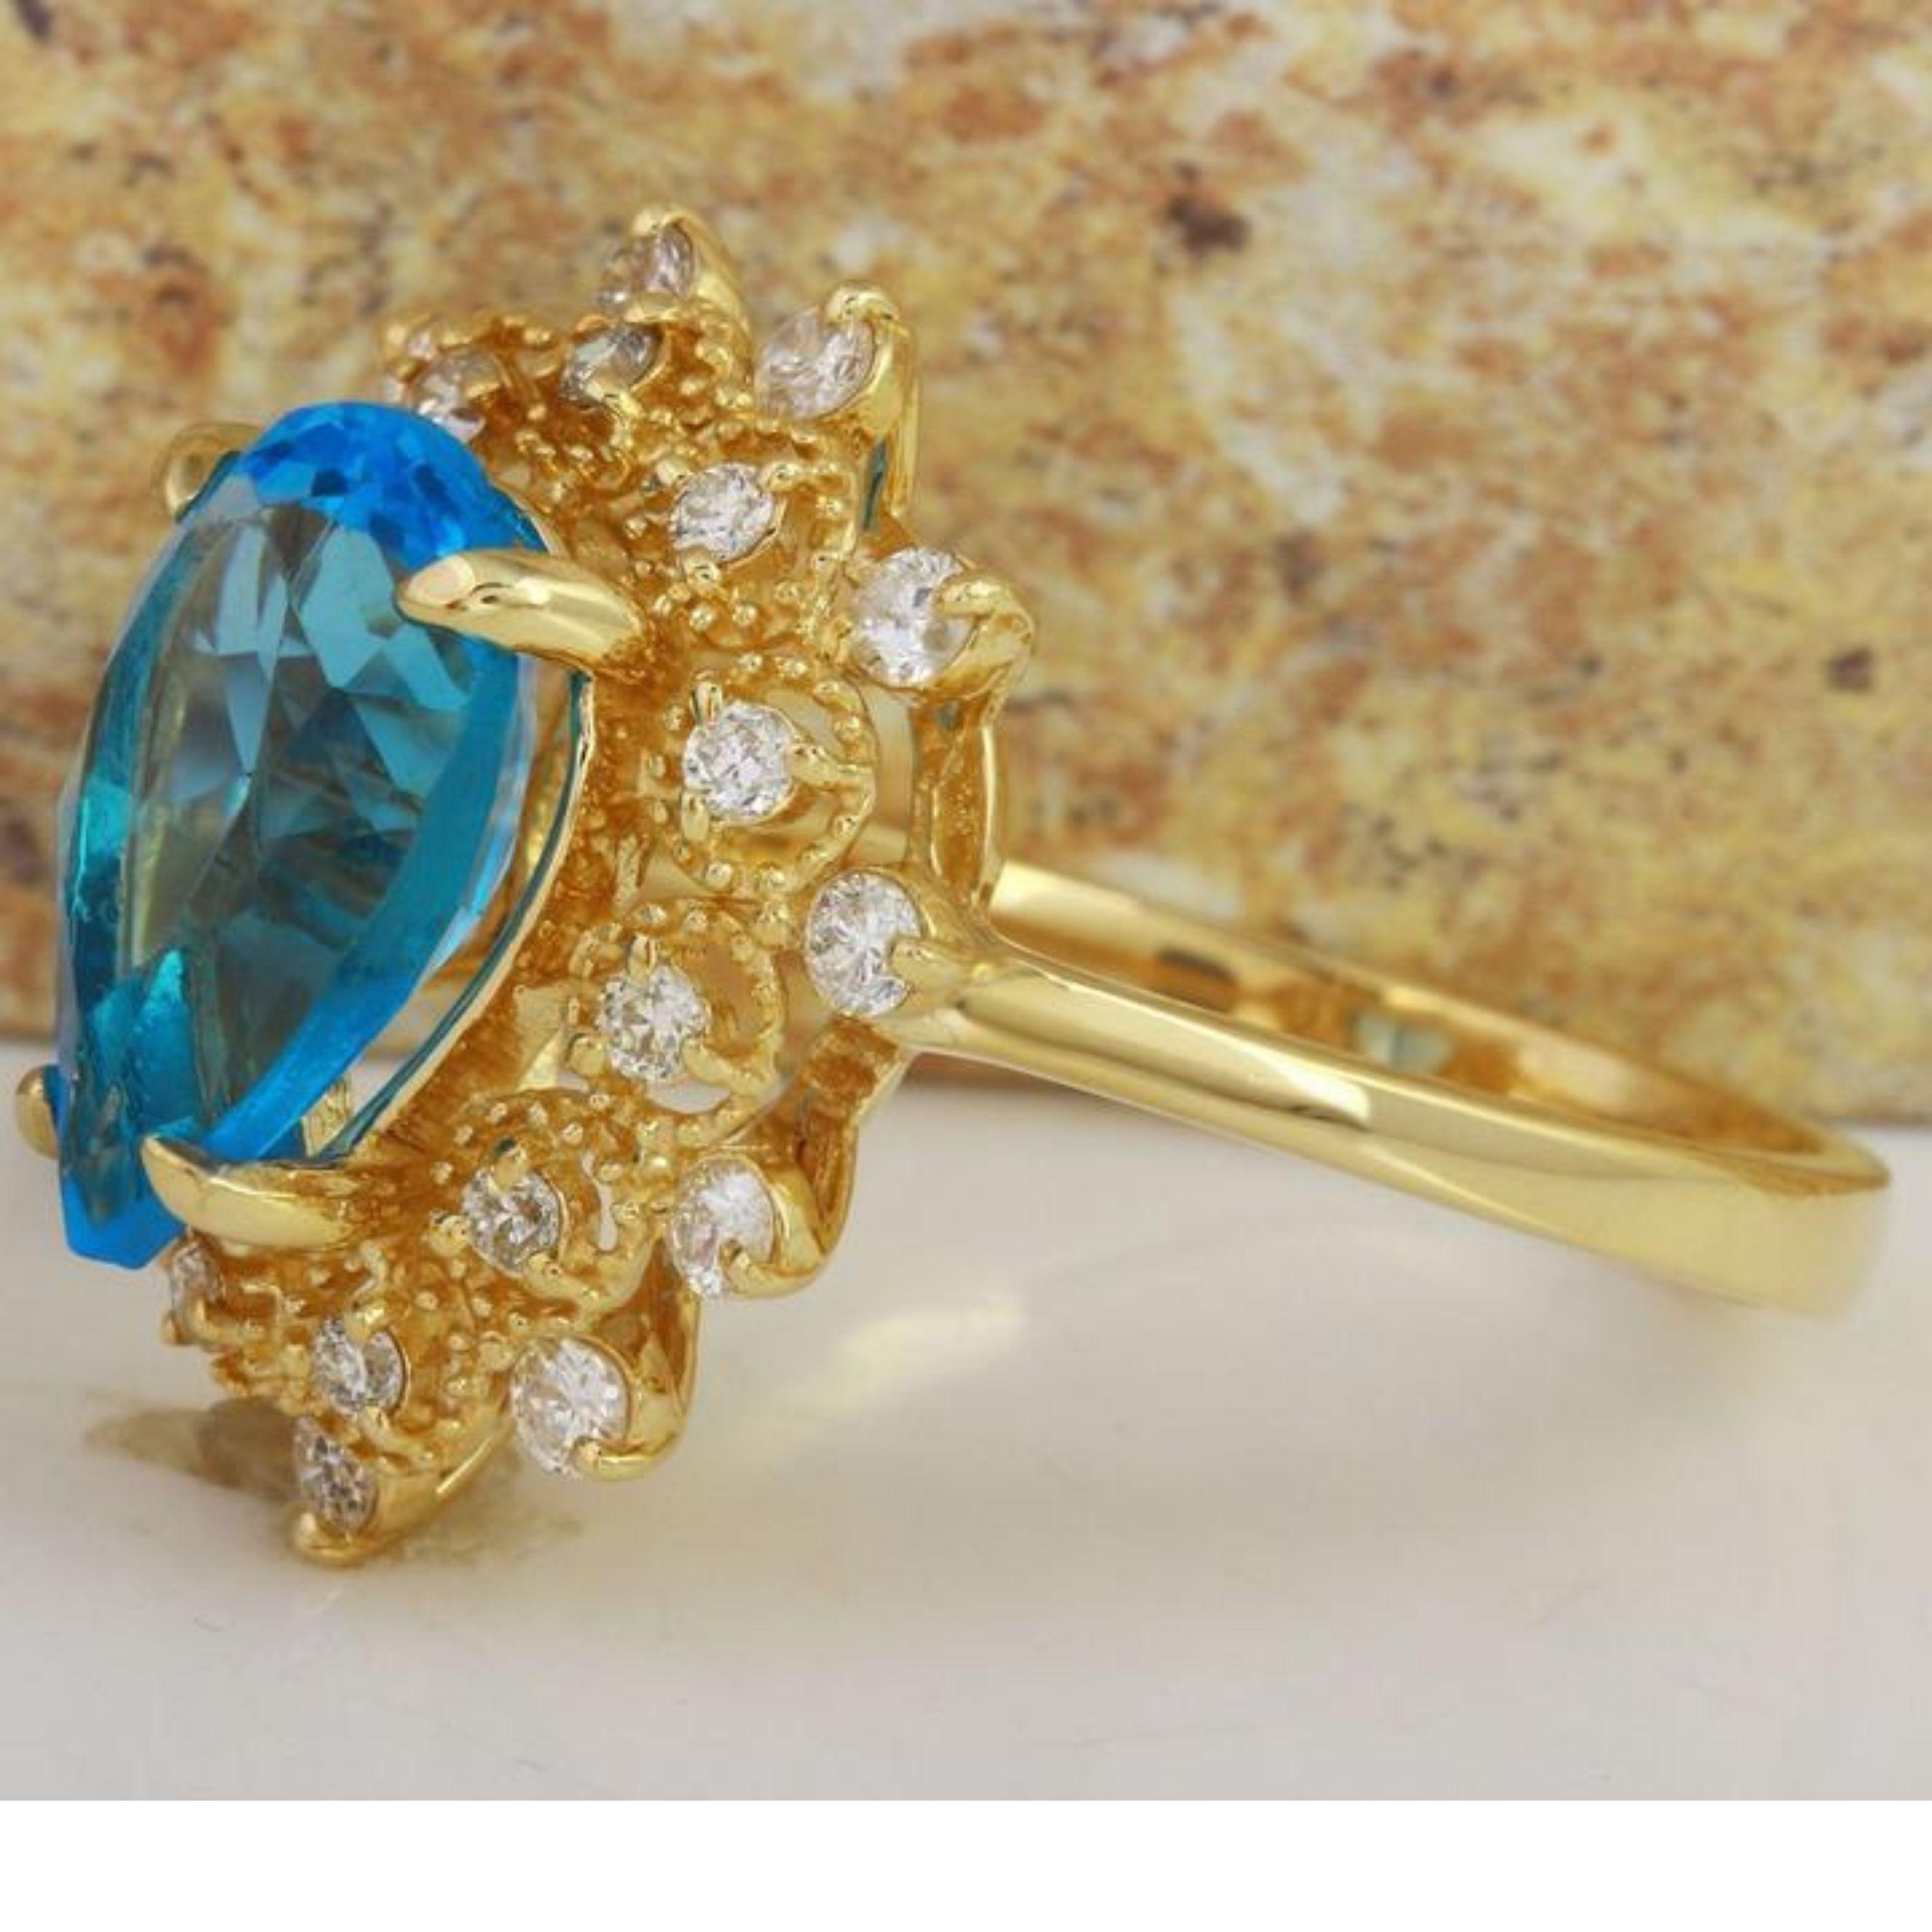 5.22 Carats Natural Gorgeous SWISS BLUE TOPAZ and Diamond 14K Solid Yellow Gold Ring

Total Natural Swiss Blue Topaz Weight is: 4.37 Carats

Topaz Measures: 12.00 x 8.00mm

Natural Round Diamonds Weight: .85 Carats (color F-G / Clarity